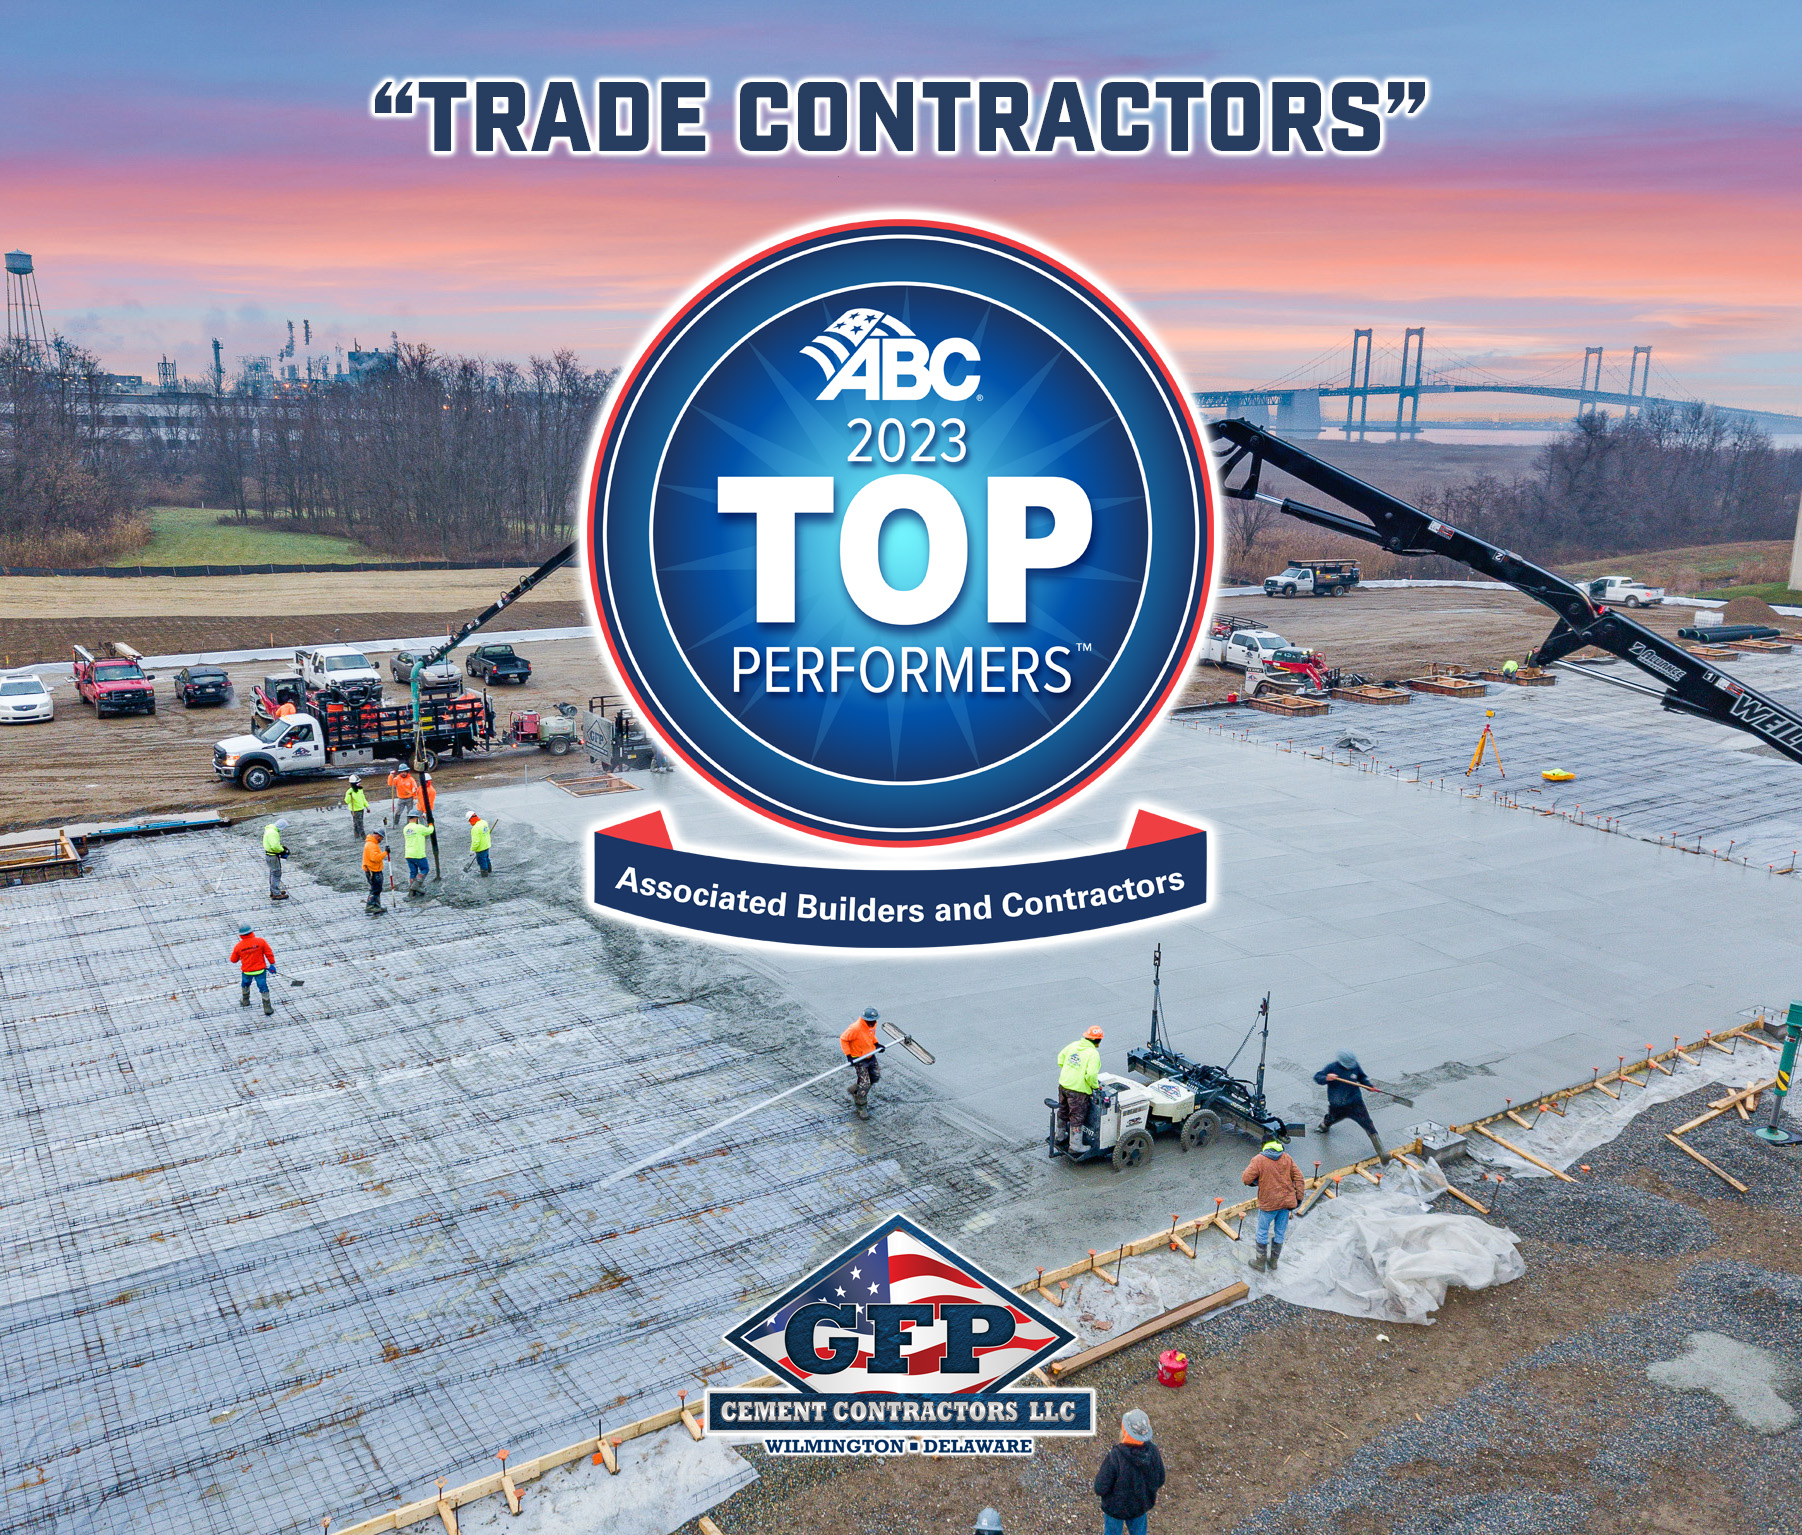 GFP Cement Contractors, LLC Honored as a National, Top-Performing US Construction TRADE Contractor by ABC…AGAIN!